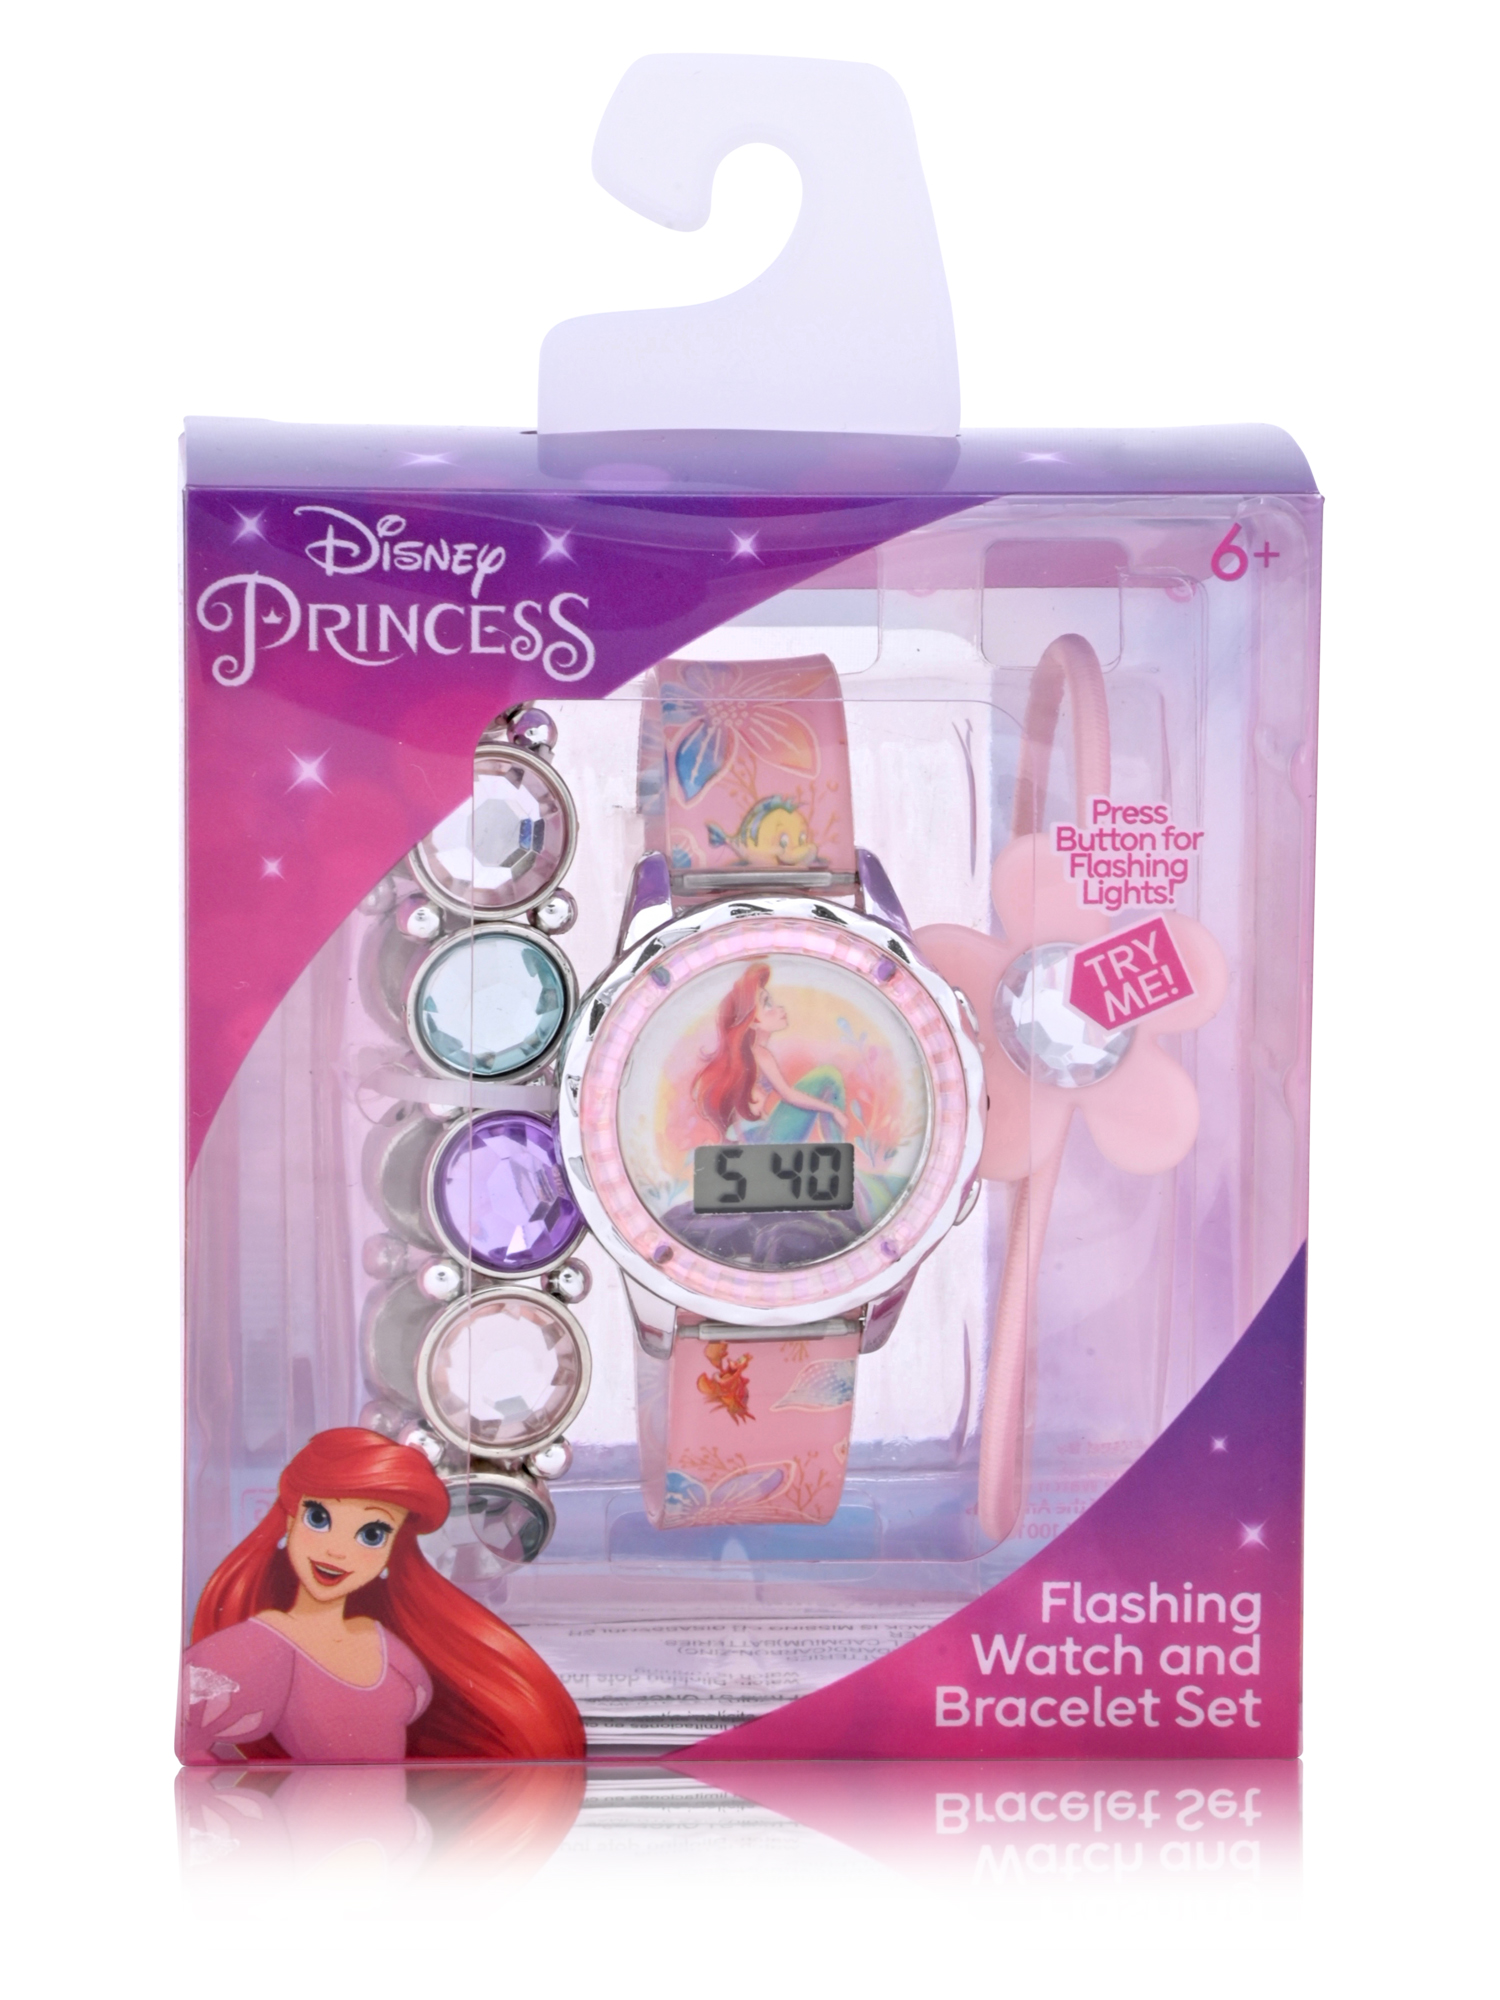 Disney Princess Ariel Girls Flashing LCD Pink Ombre Silicone Watch, Bracelet and Hair Accessory 3 Piece Set - image 5 of 6